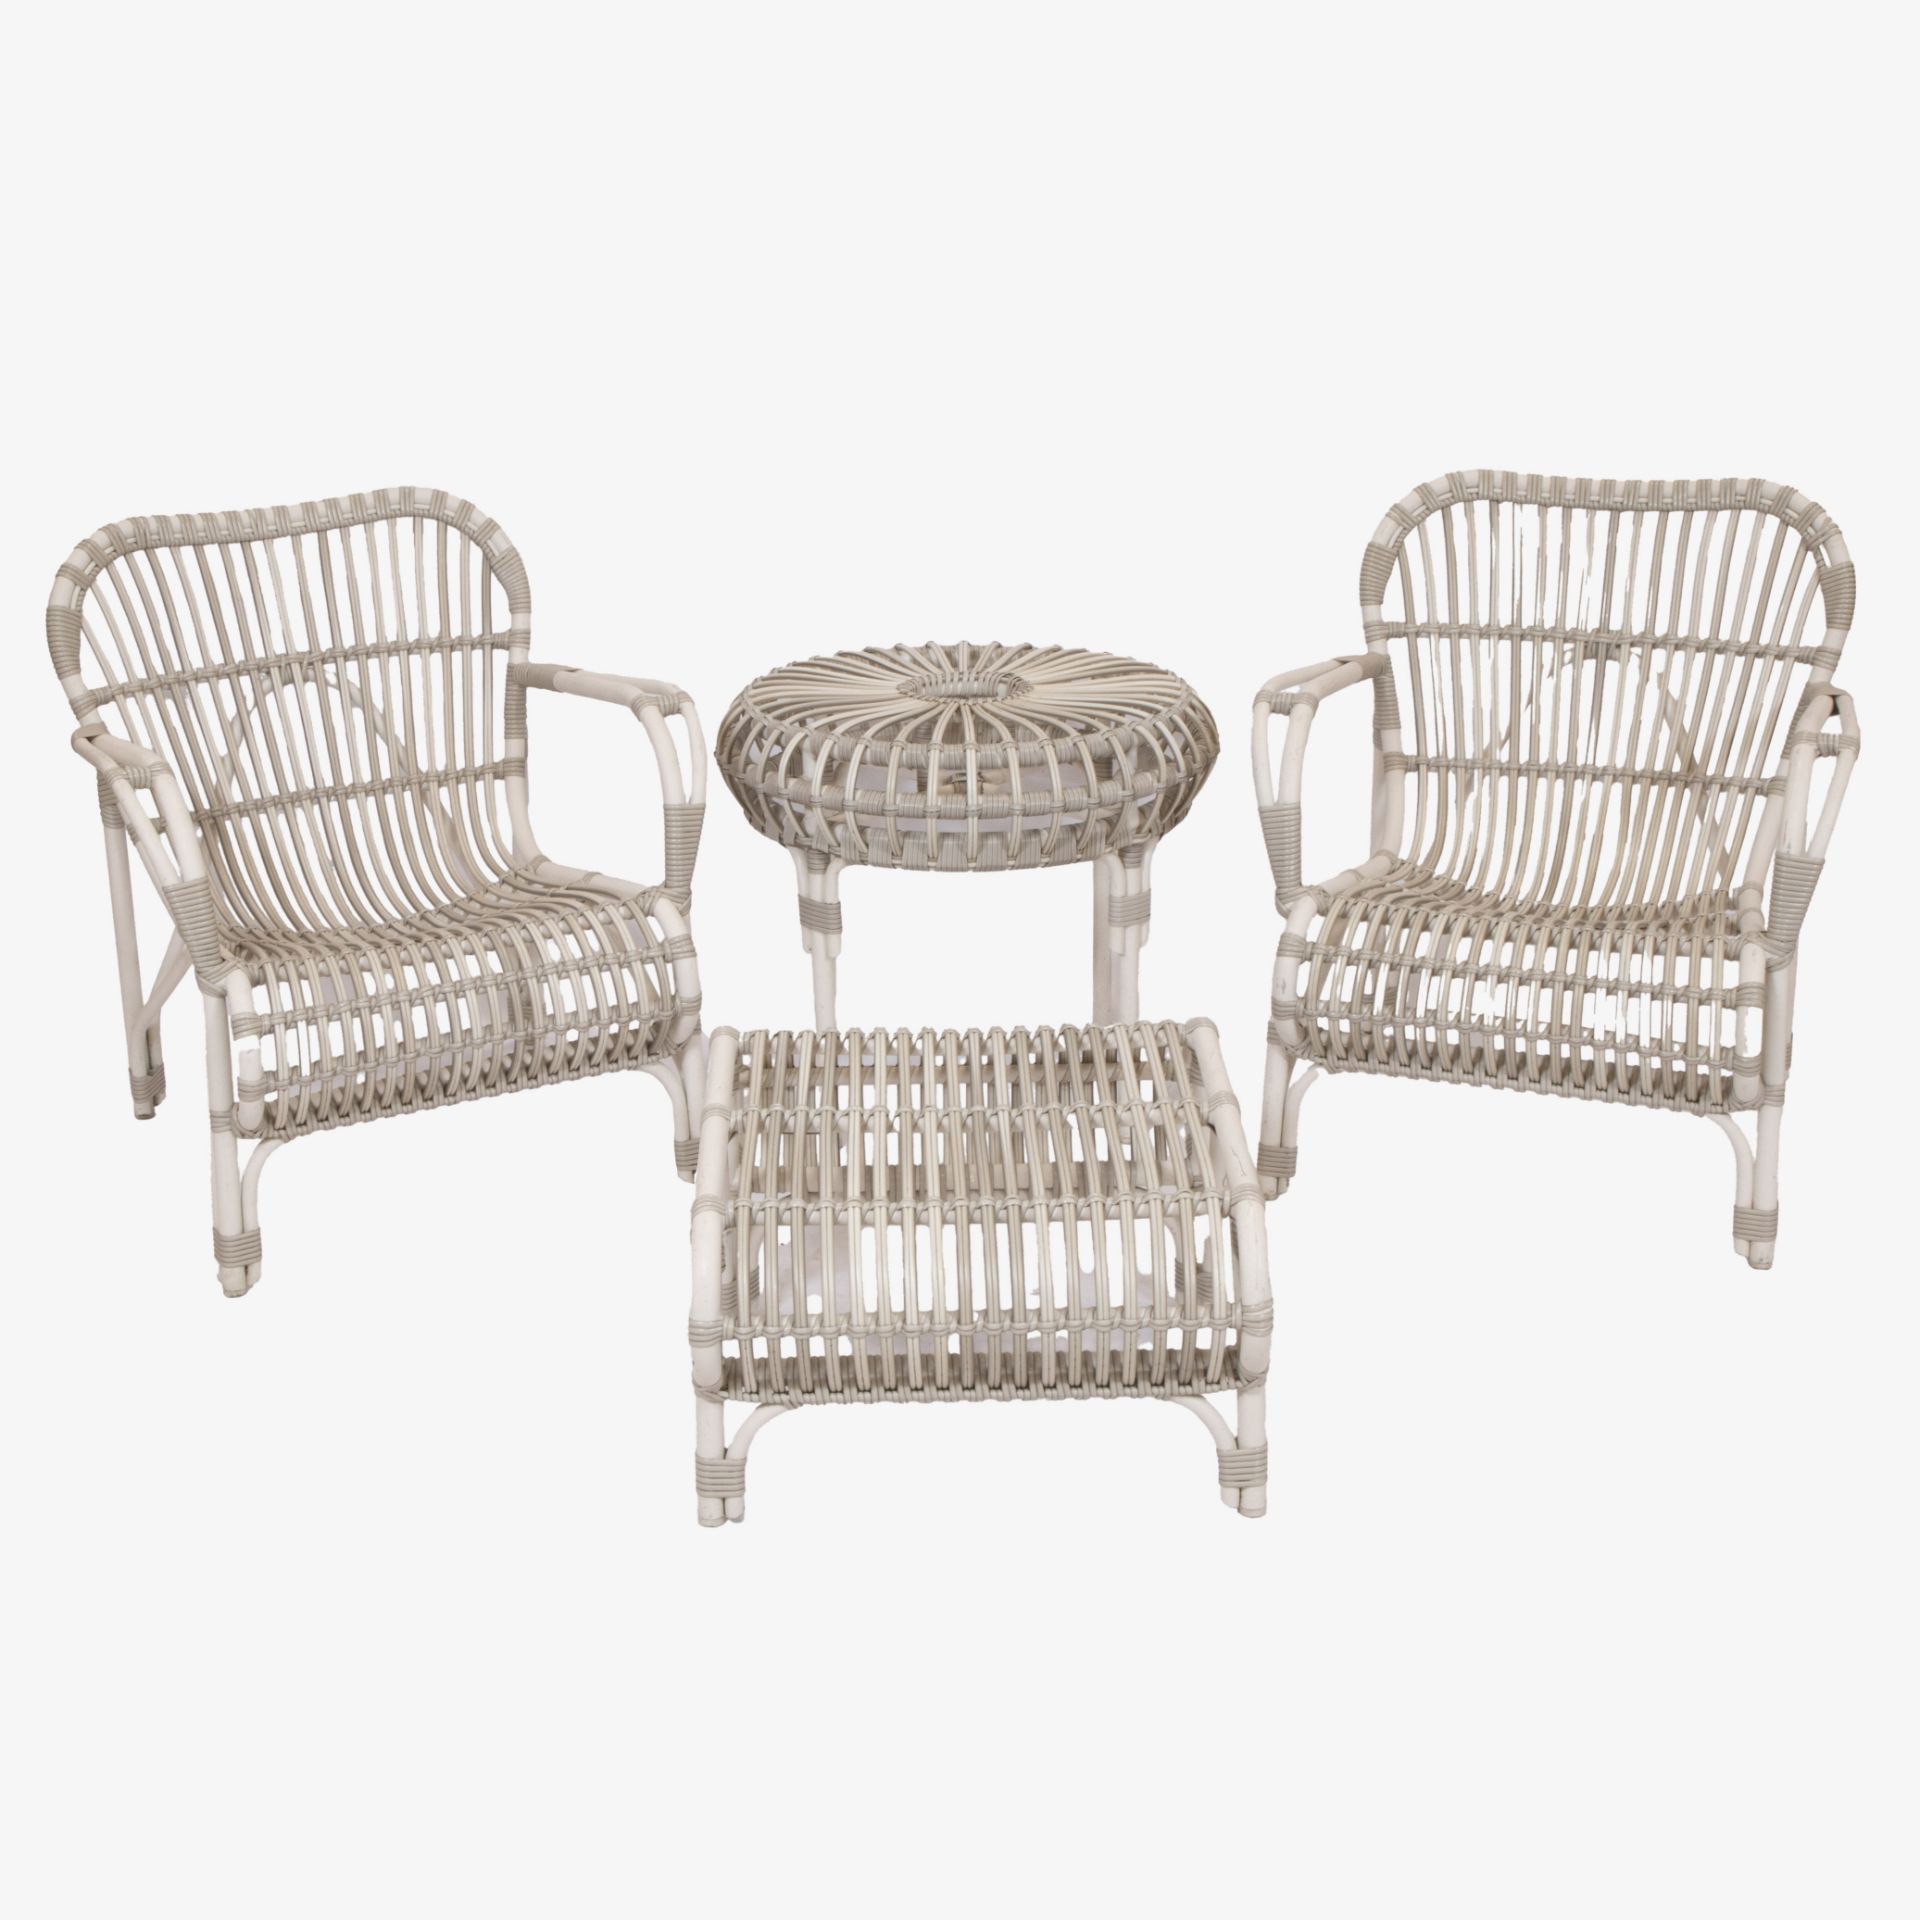 Metal garden set comprising 2 armchairs, table and footstool by Vincent Sheppard, marked